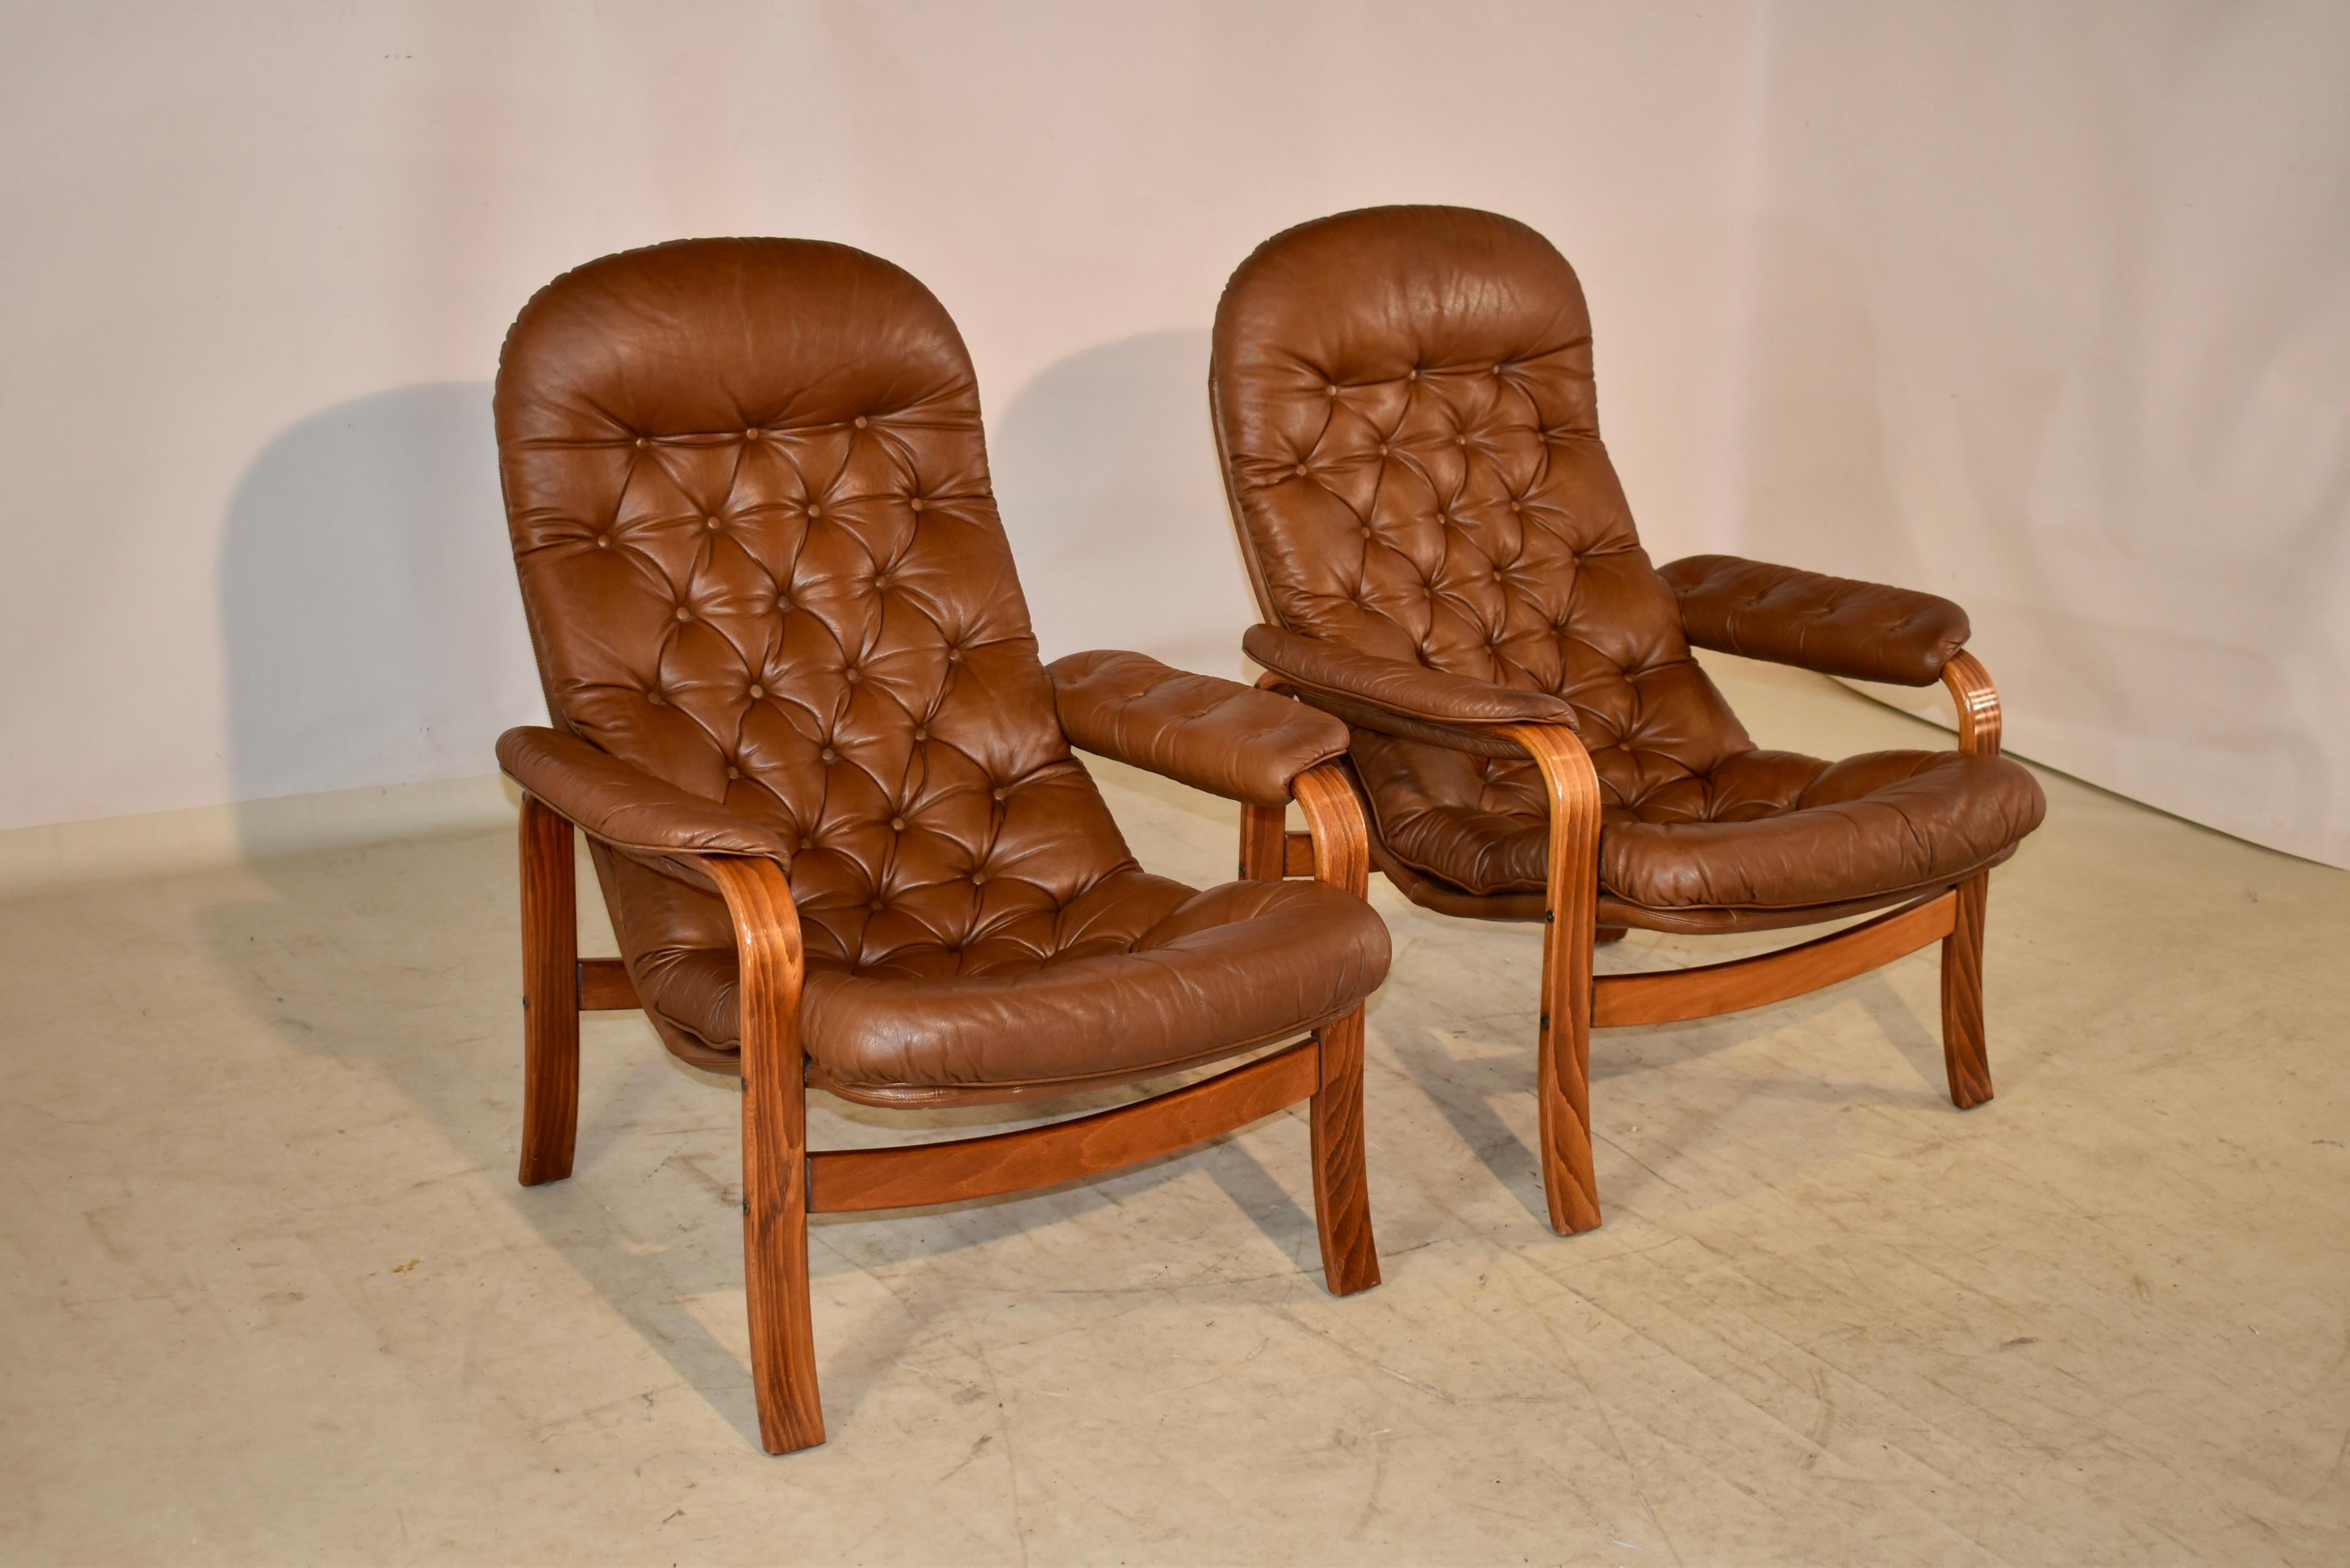 Pair of Scandinavian Modern Mid-Century Modern lounge chairs by Gote Mobler from Sweden. These chairs are completely original, and are in wonderful condition. The seats are so comfortable and are worn in such an elegant way as to look comfortable,